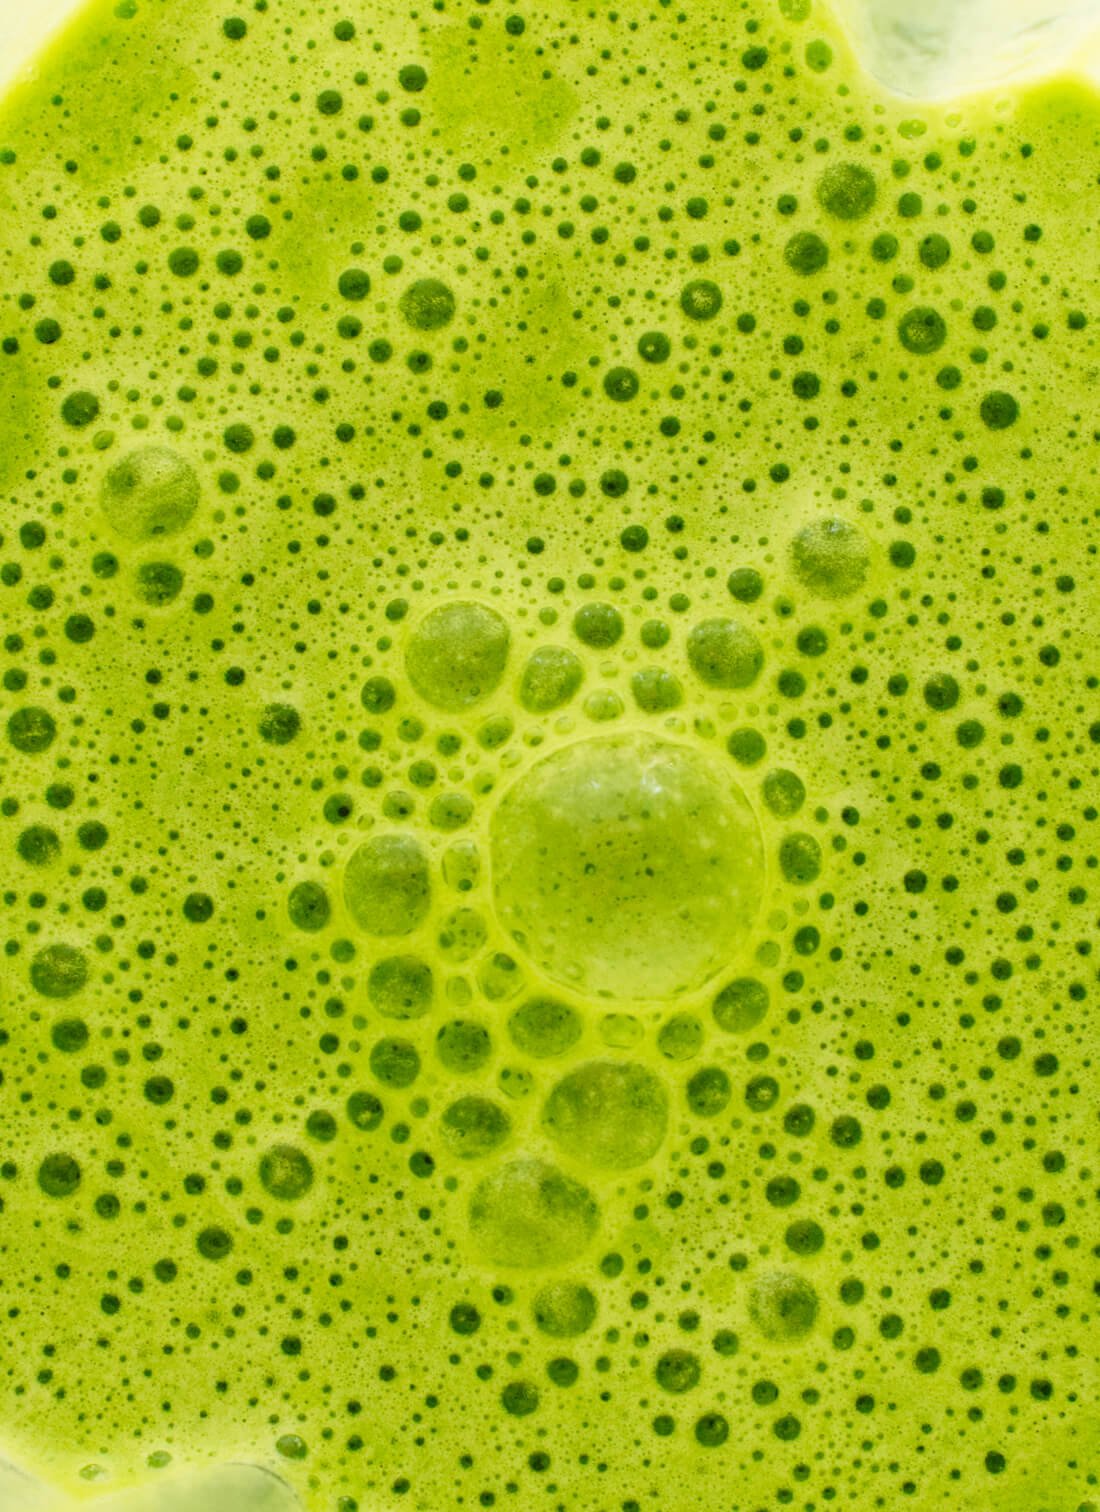 green smoothie close-up